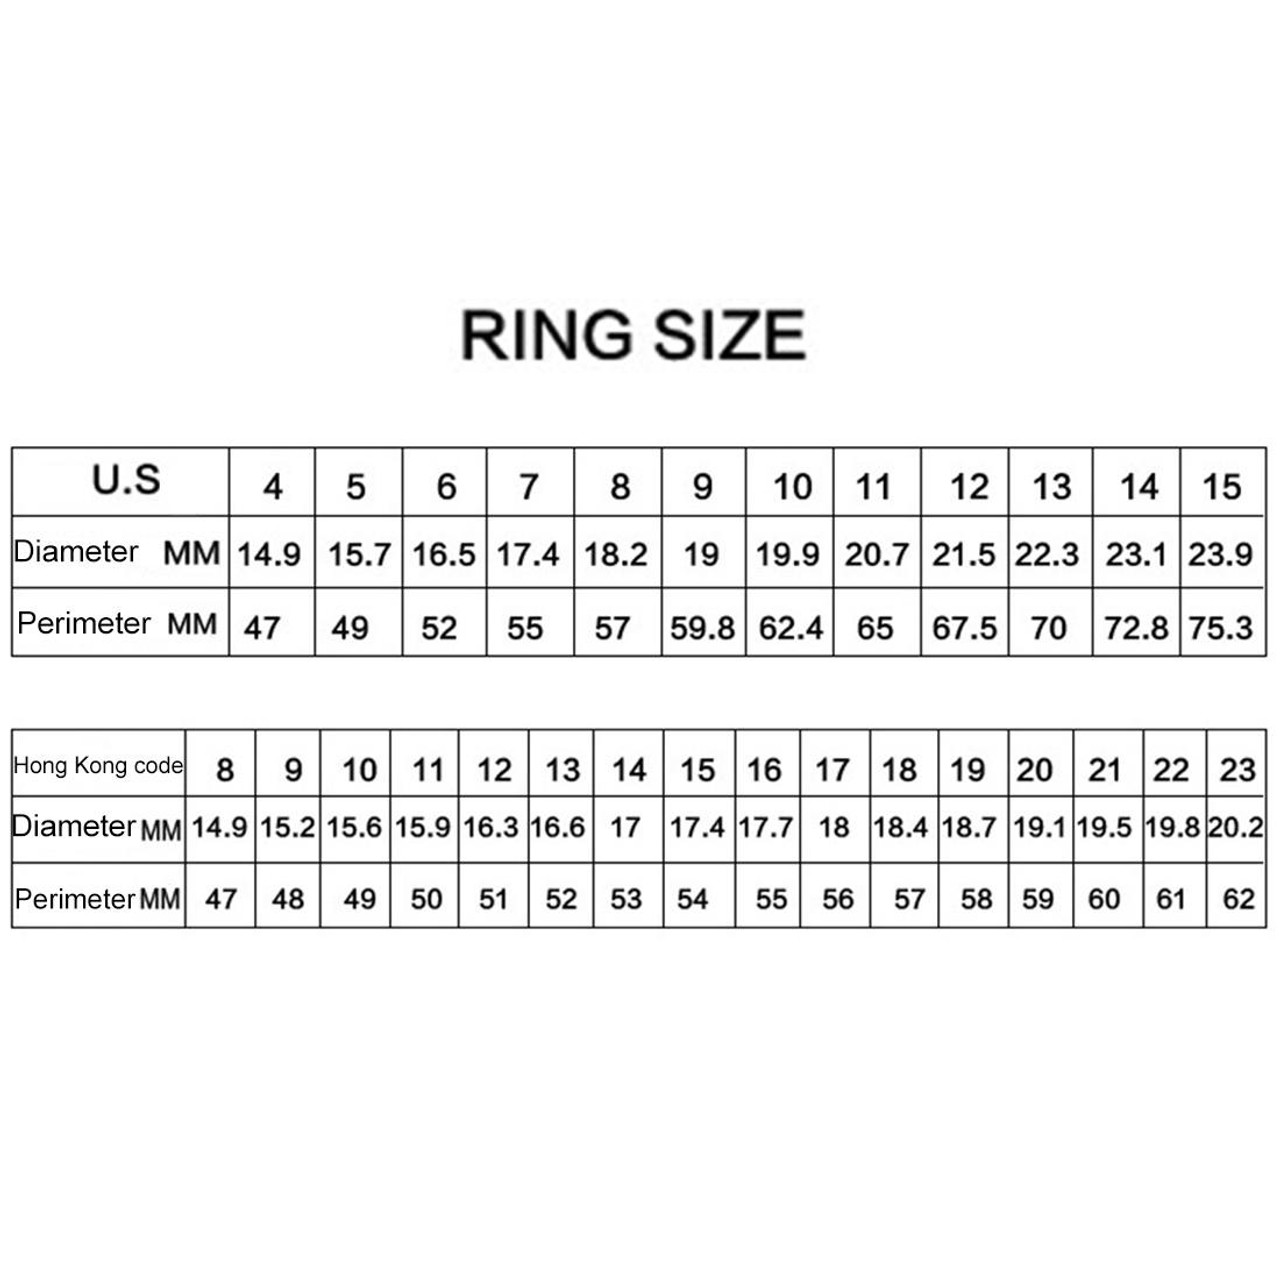 What's a ring size of 17 in Argentina converted to US sizes? - Quora